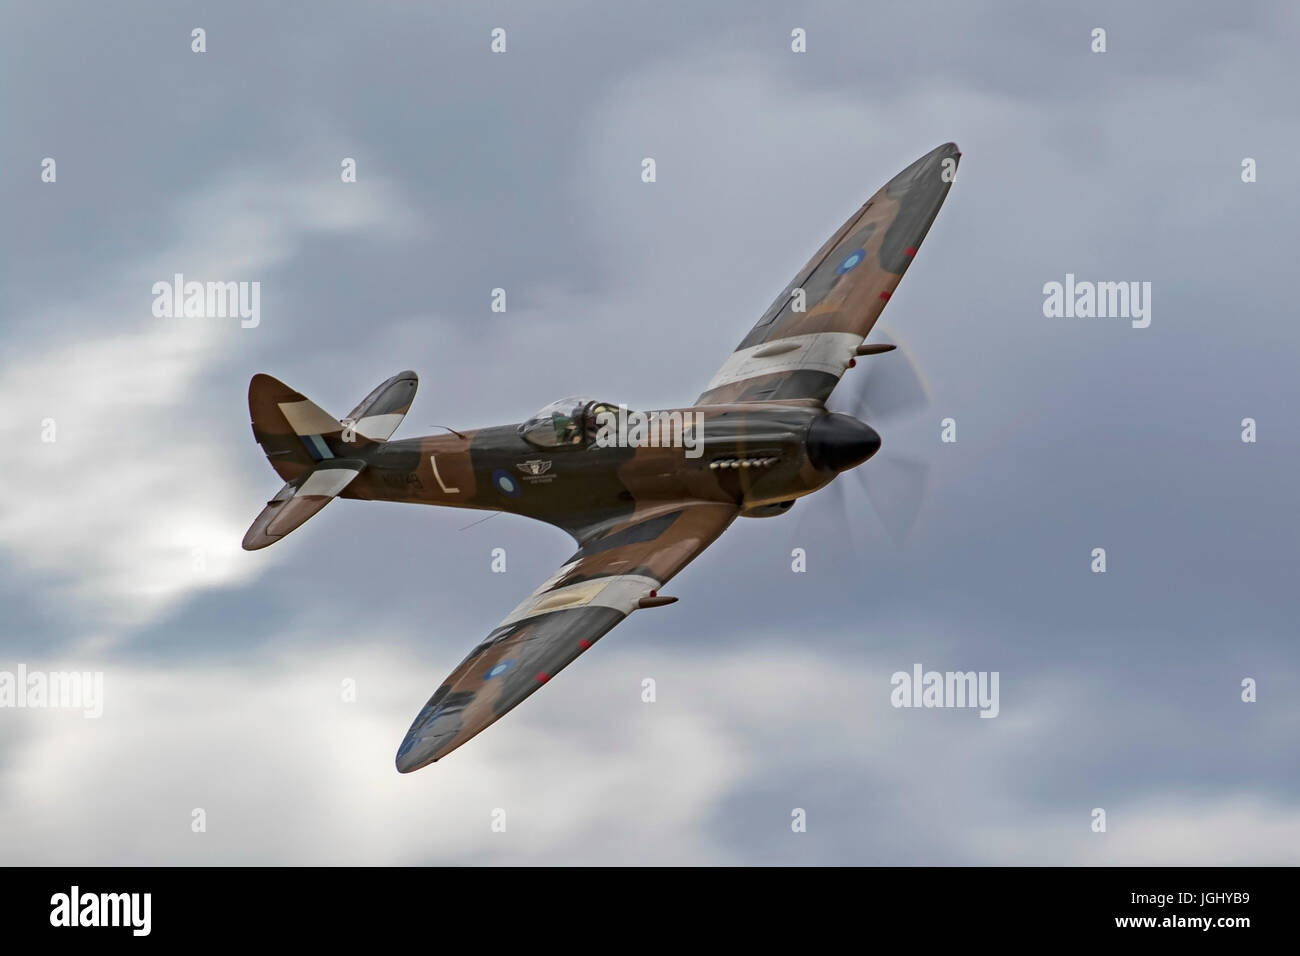 Airplane Spitfire WWII vintage fighter aircraft Stock Photo